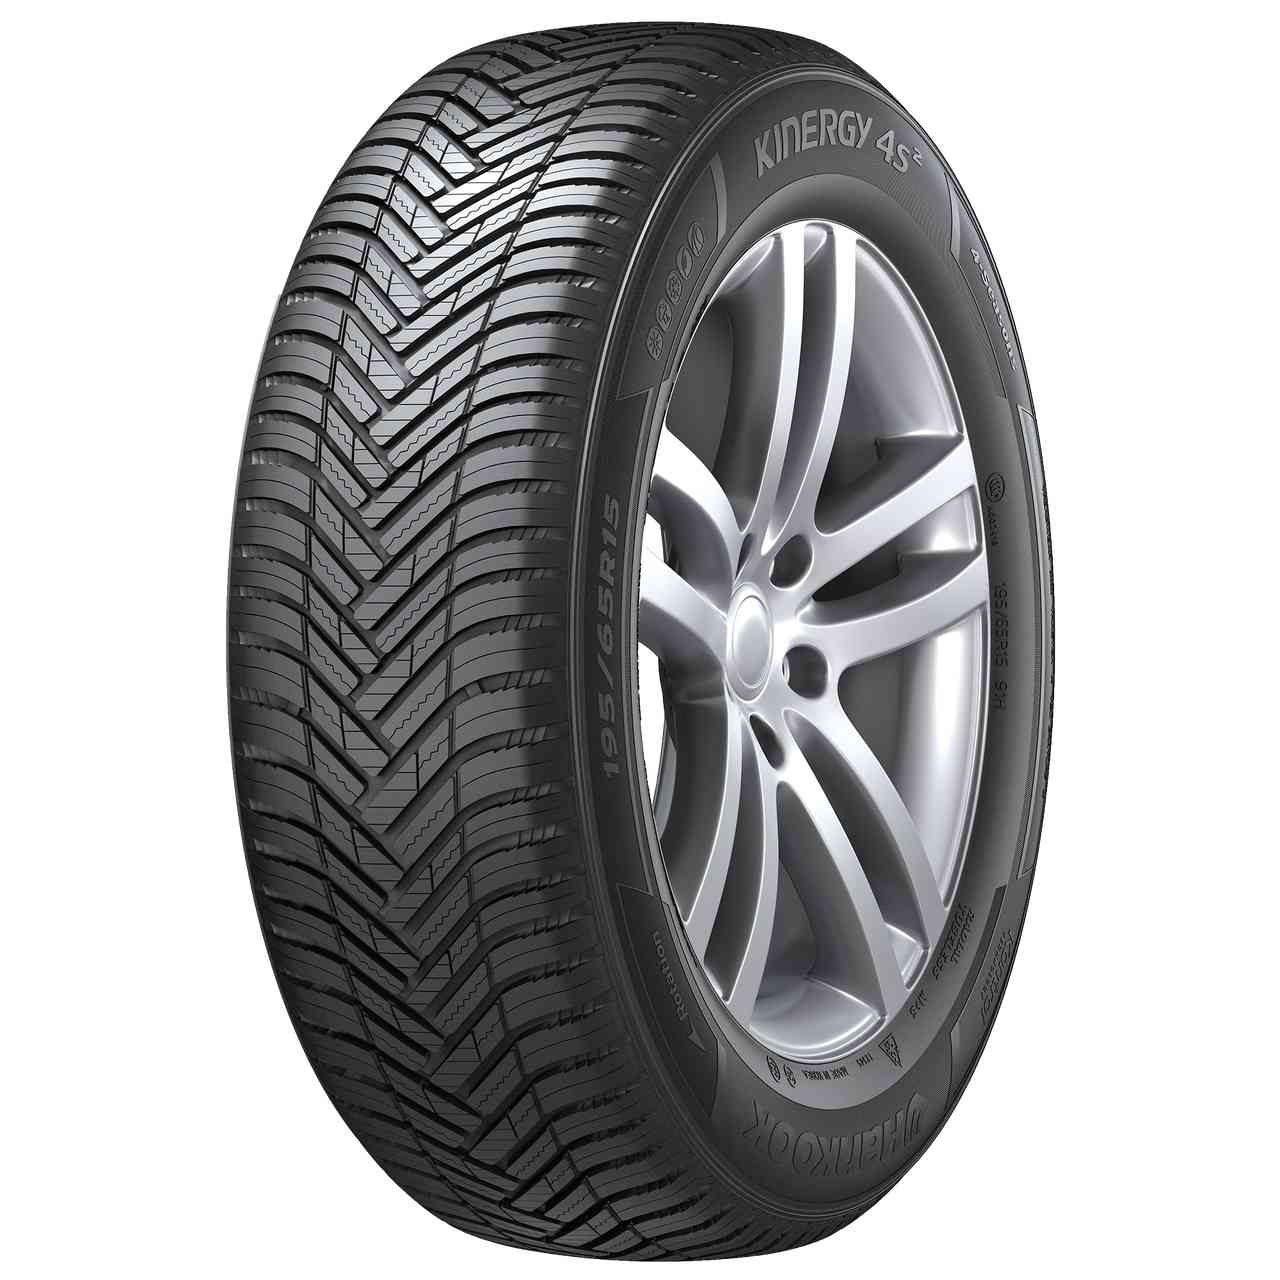 HANKOOK KINERGY 4S 2 (H750) 215/65R16 102V BSW